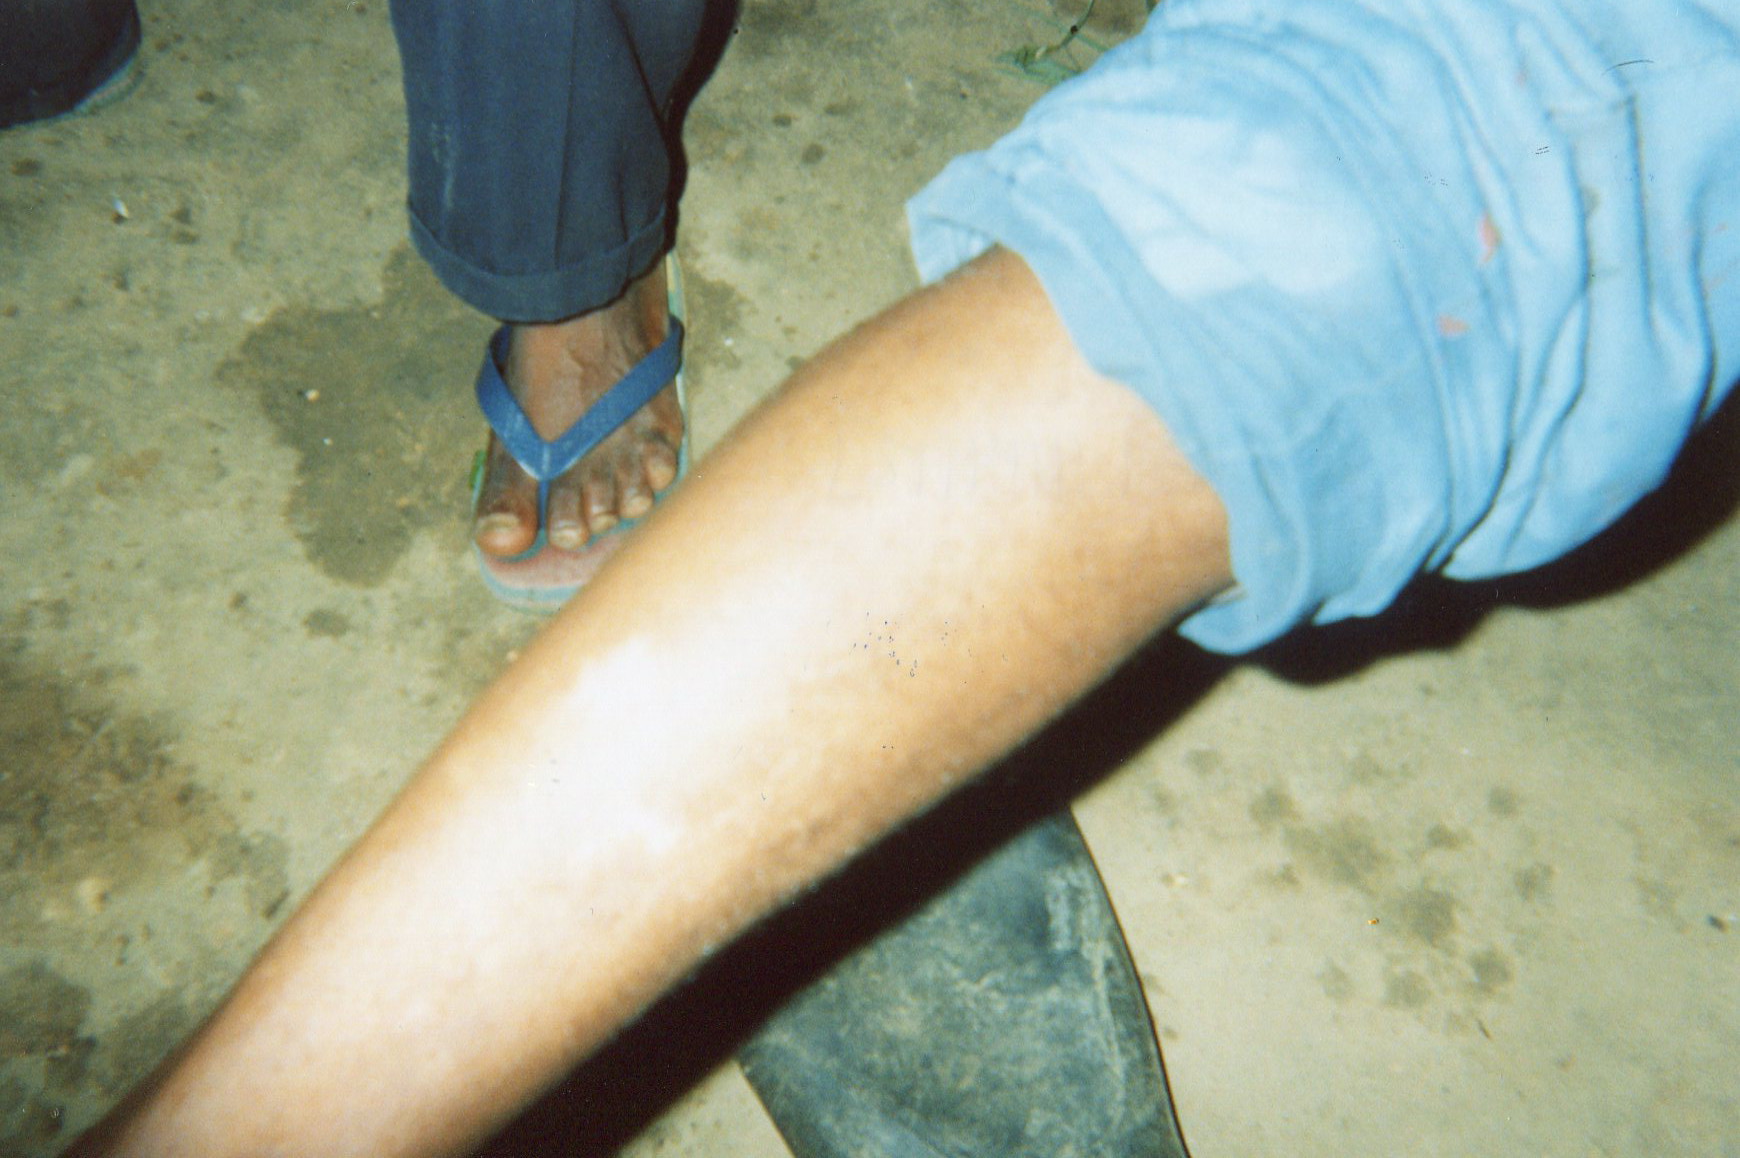  This shows the scar of Mai Mai forced to join armed groups, he was beaten a lot, also he was shot on the leg, he is unable to work.&nbsp; 